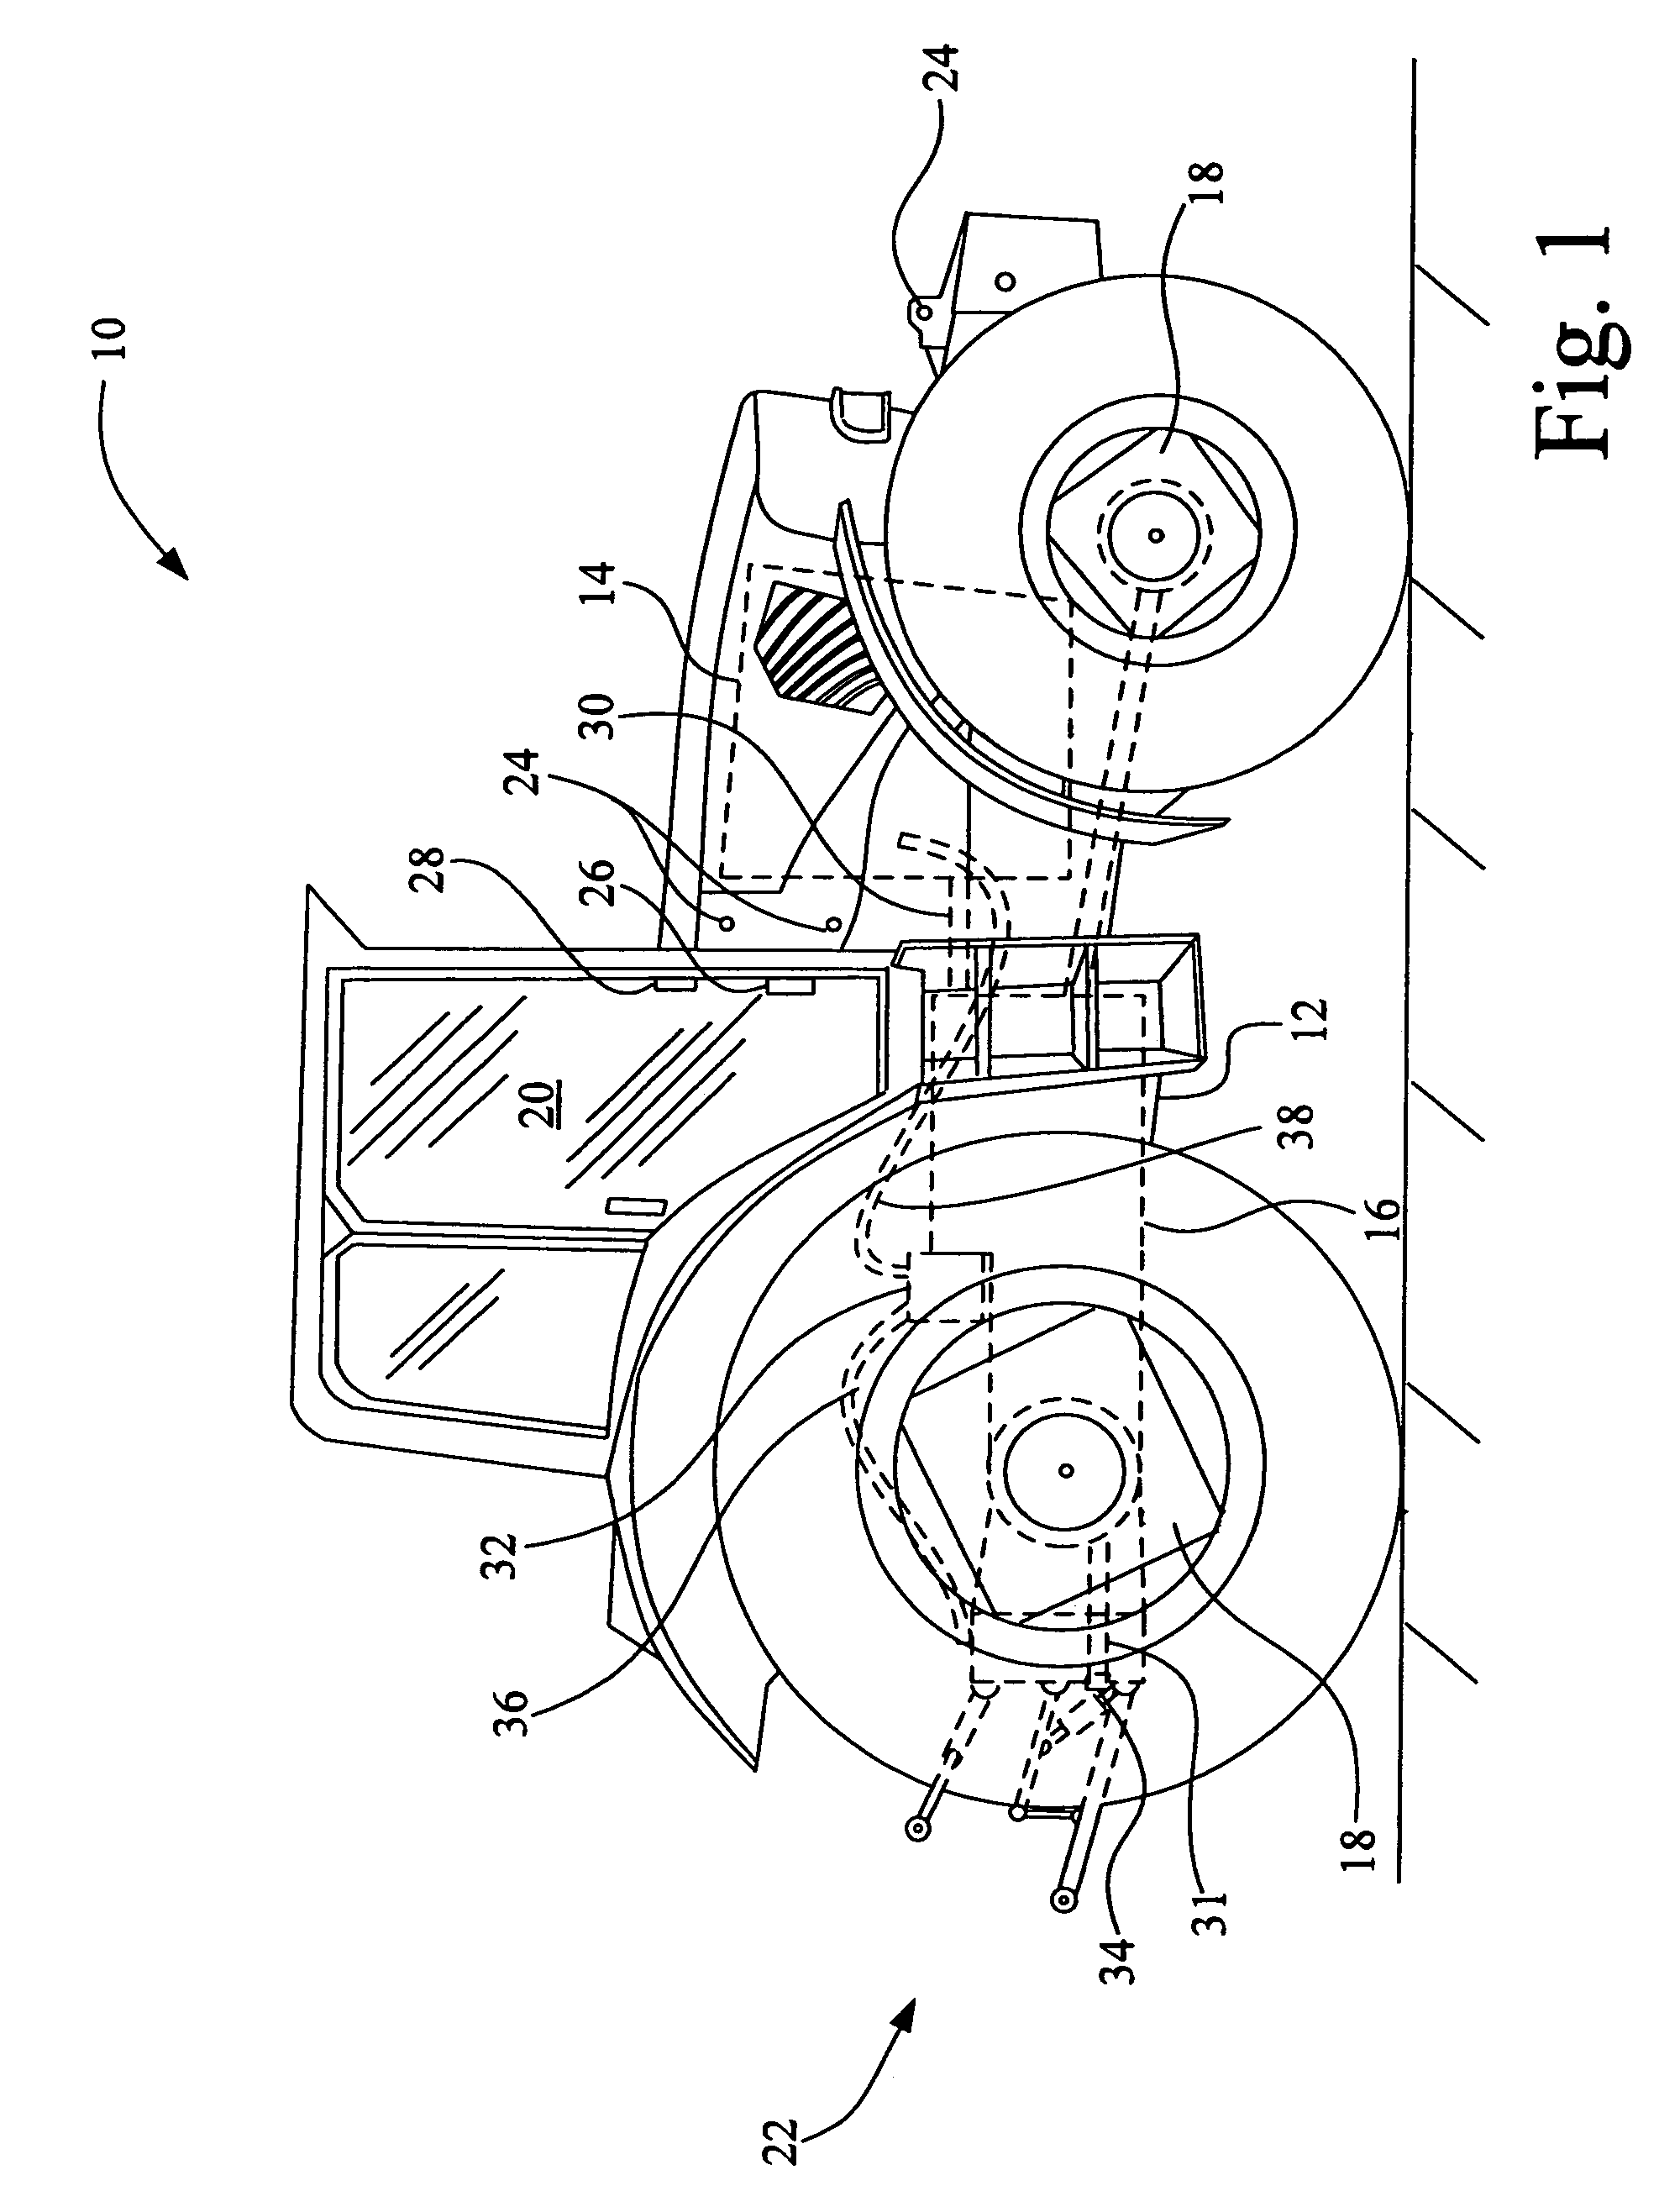 Method for optimizing fuel consumption in a machine powered by an internal combustion engine